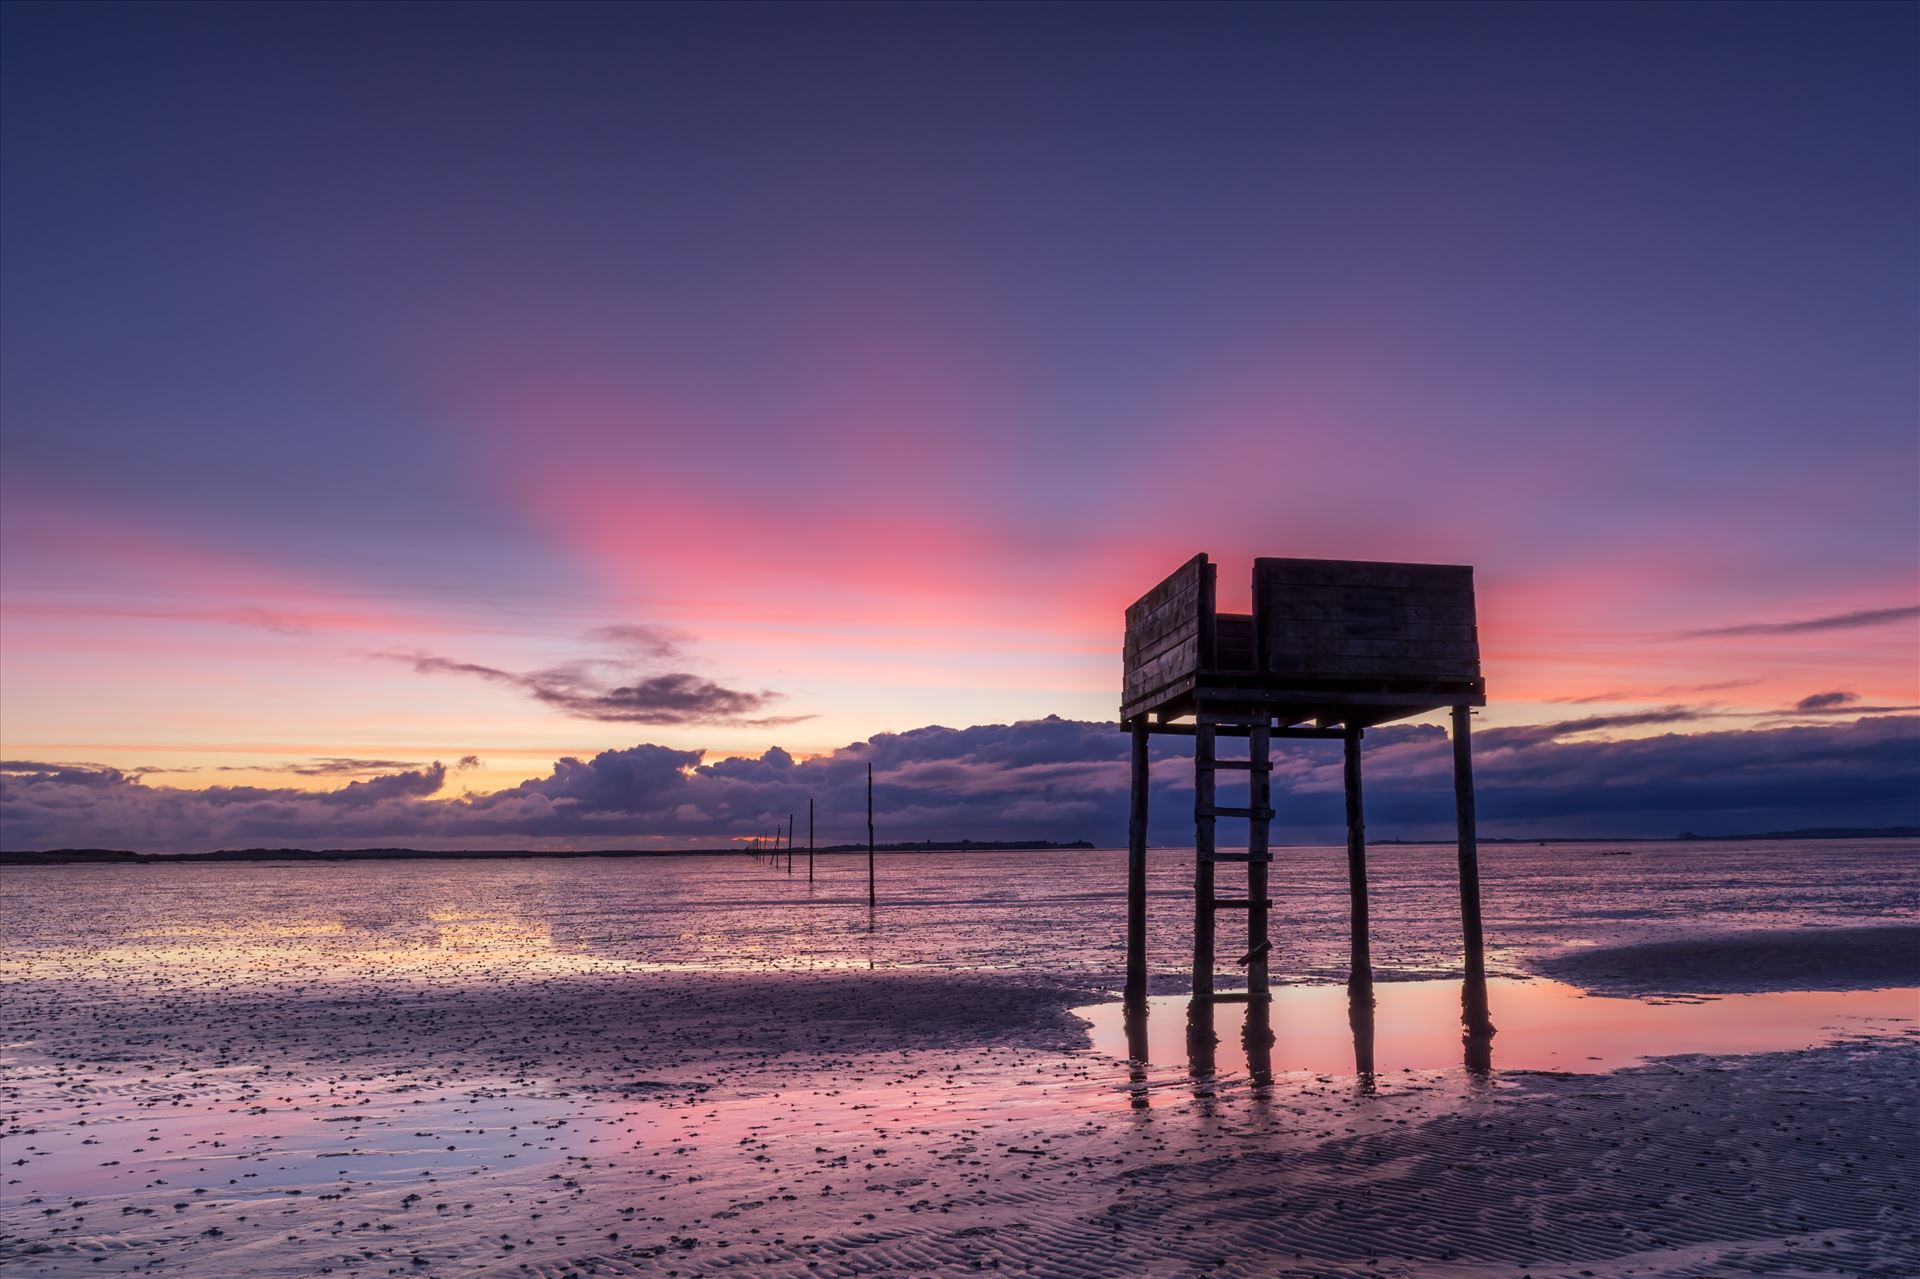 Sunrise at Holy Island - The Holy Island of Lindisfarne is a tidal island off the northeast coast of England. It is also known just as Holy Island & is now a popular destination for visitors to the area. by philreay